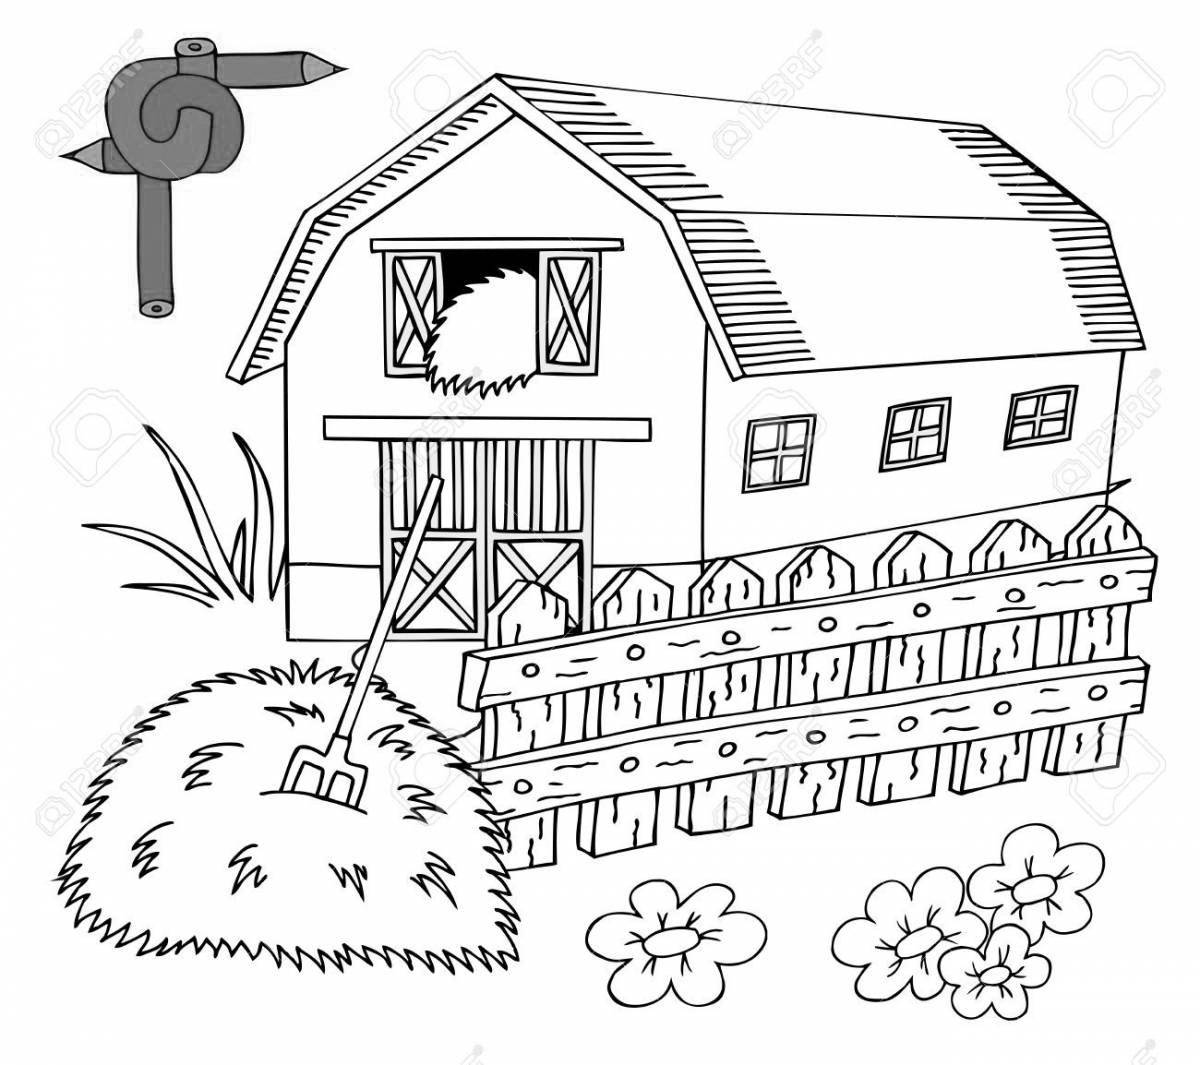 Playful baby chicken coop coloring page